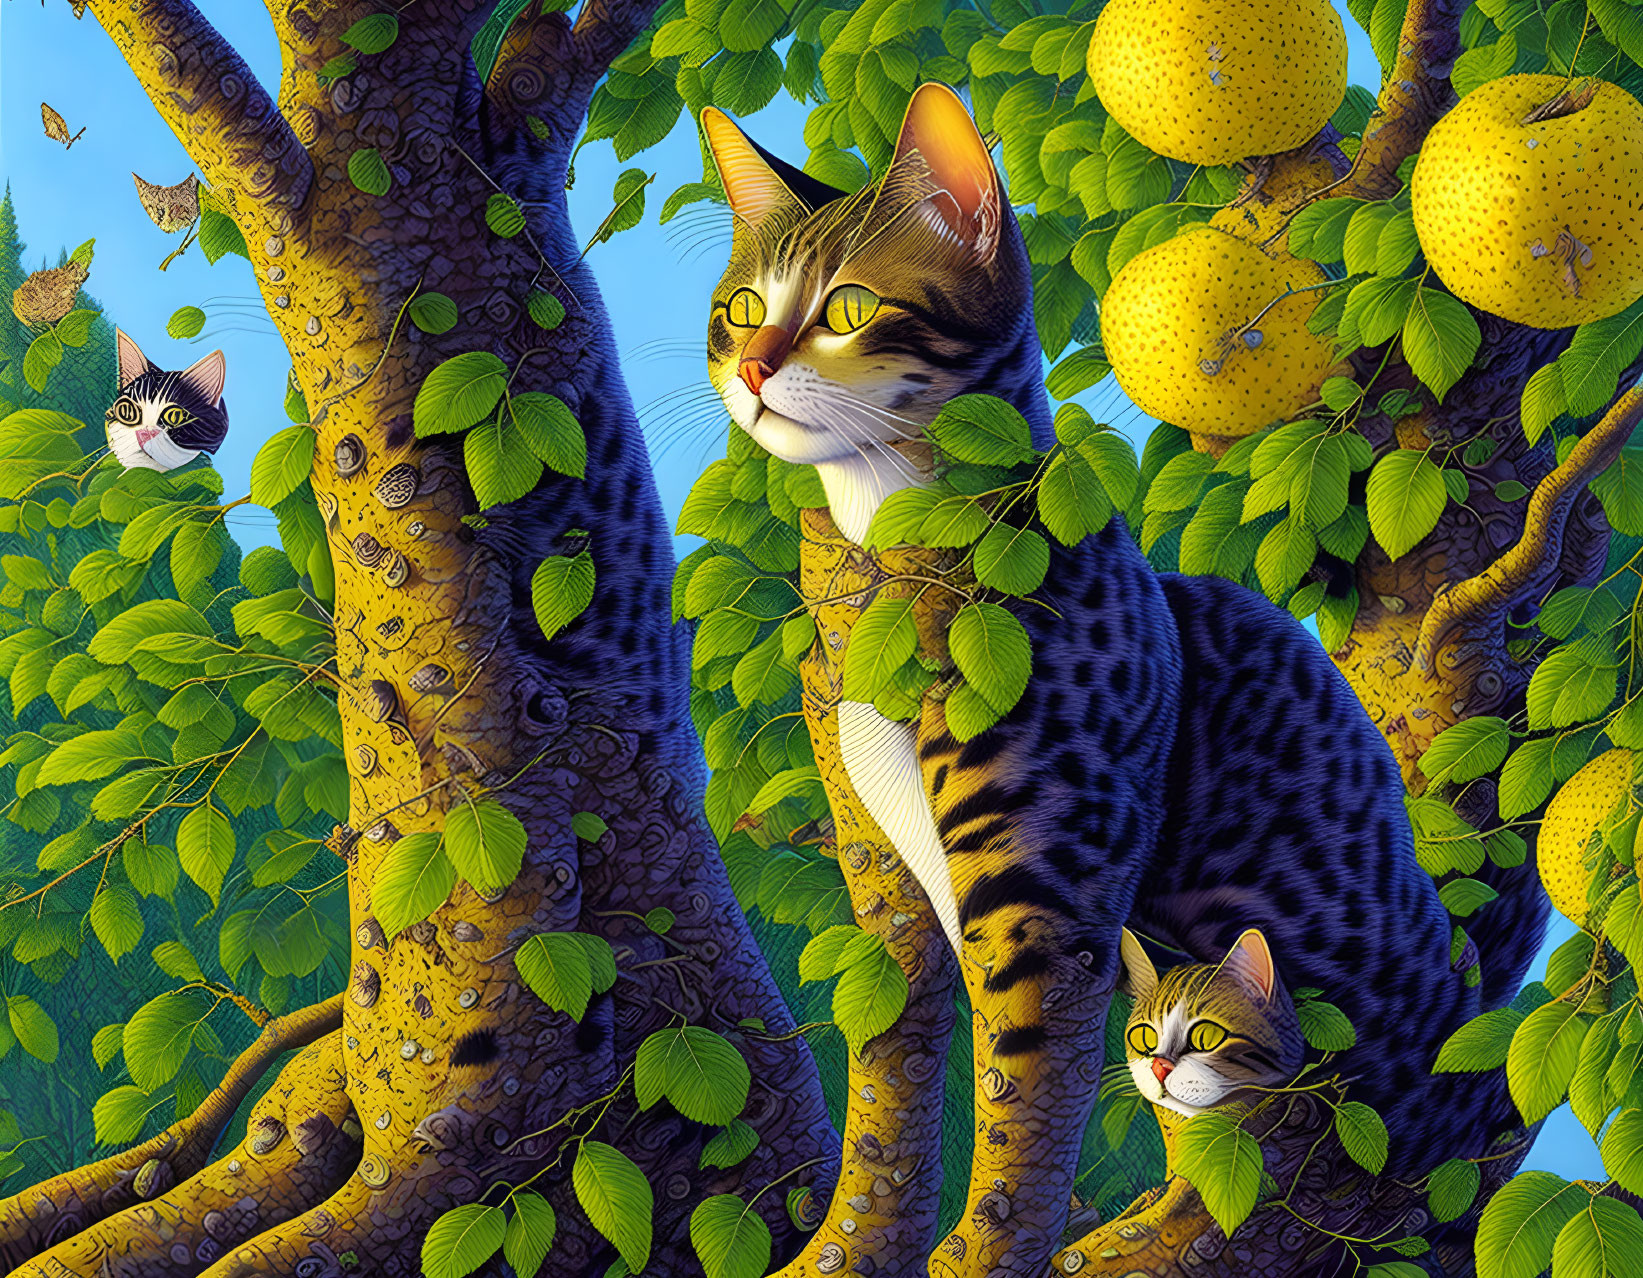 Spotted camouflaged cats in lemon tree setting